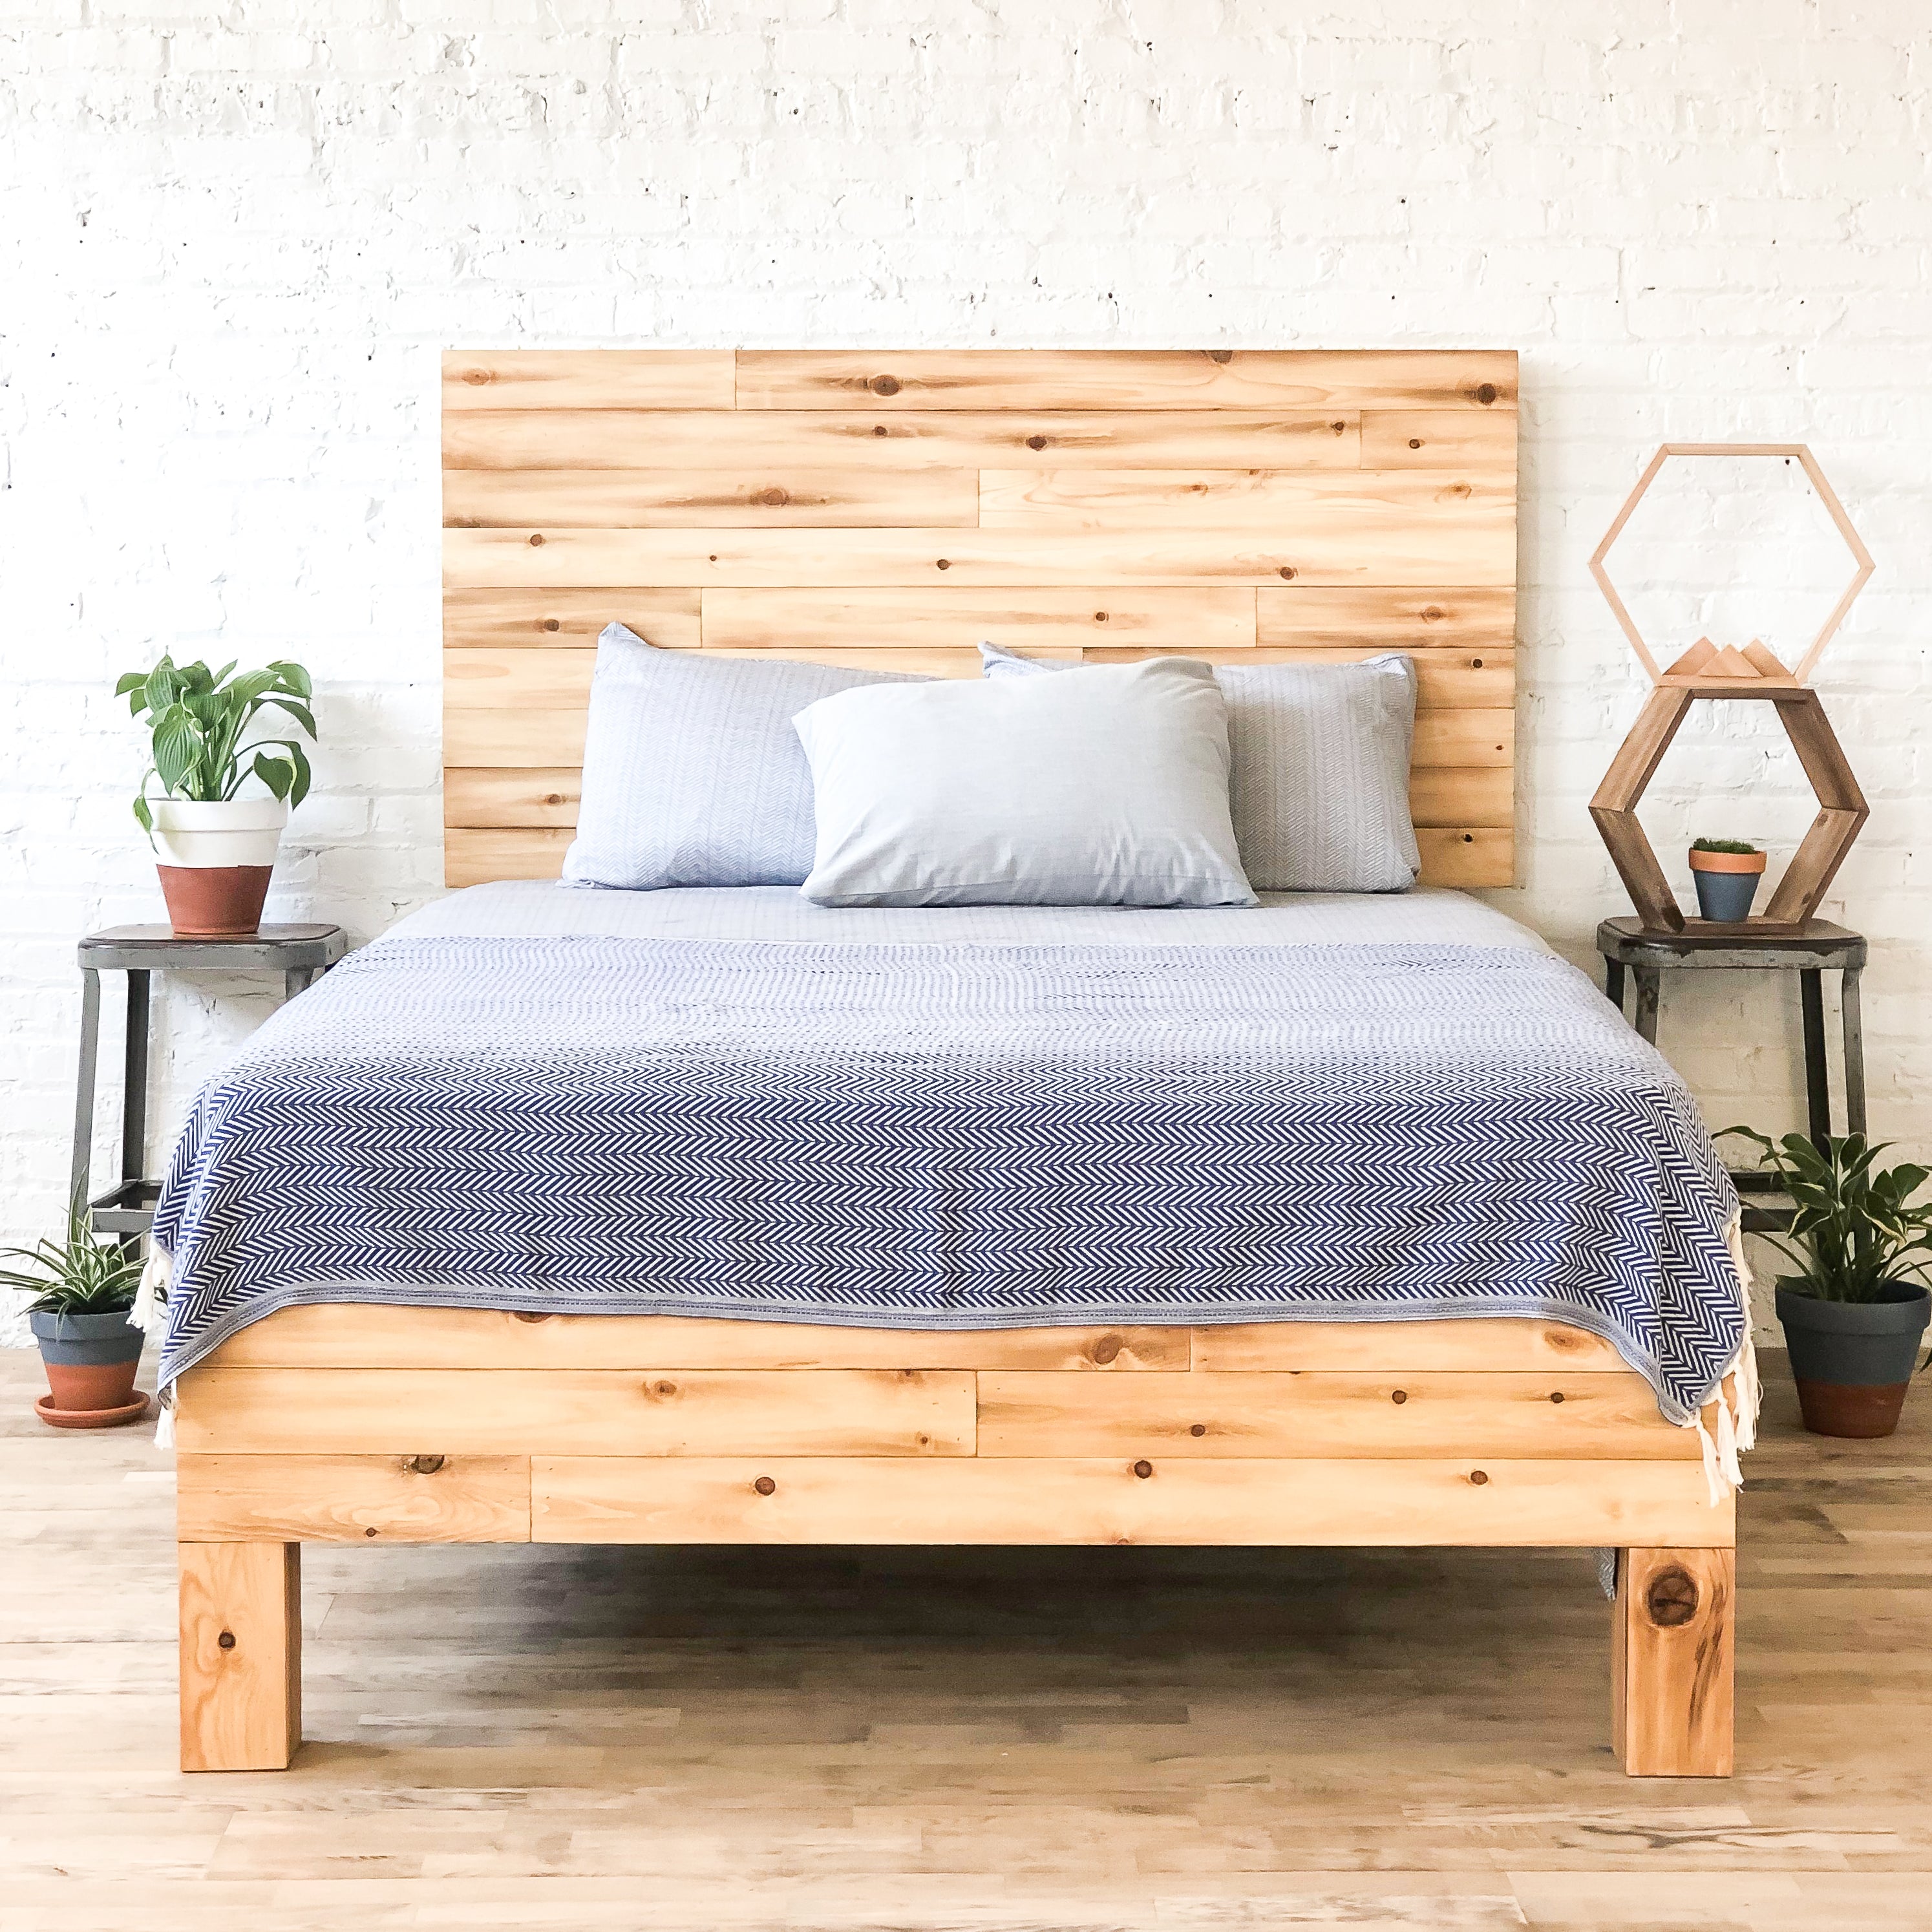 The Northwoods Bed - Rustic Knotty - Handmade in USA – Urban Billy